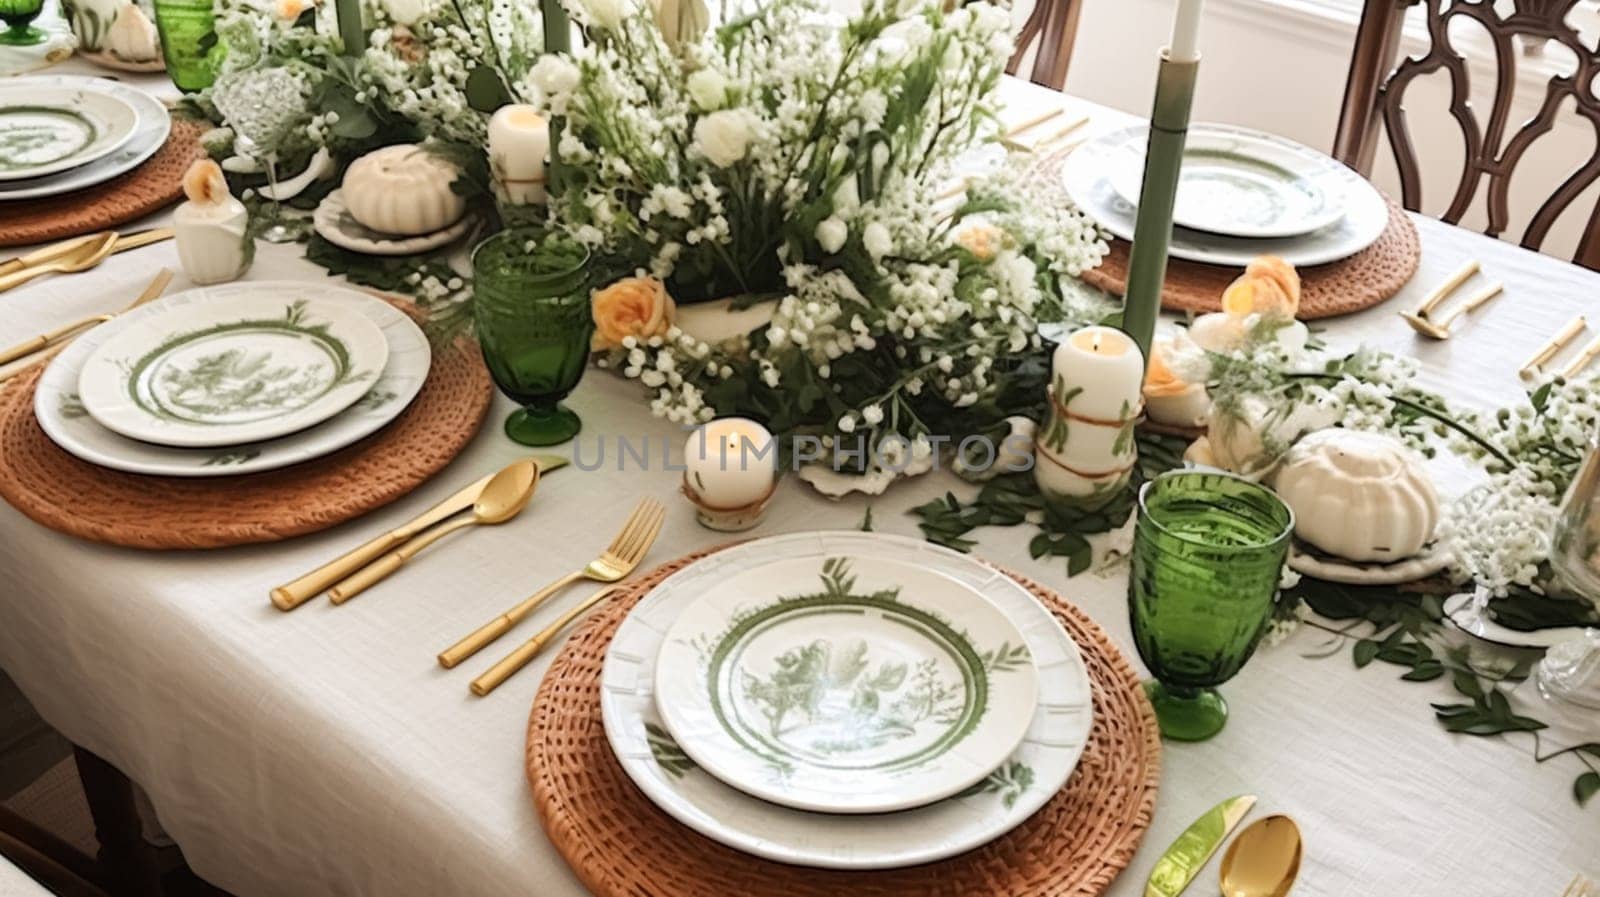 Green and white table decor, holiday tablescape and dinner table setting, formal event decoration for wedding, family celebration, English country and home styling by Anneleven